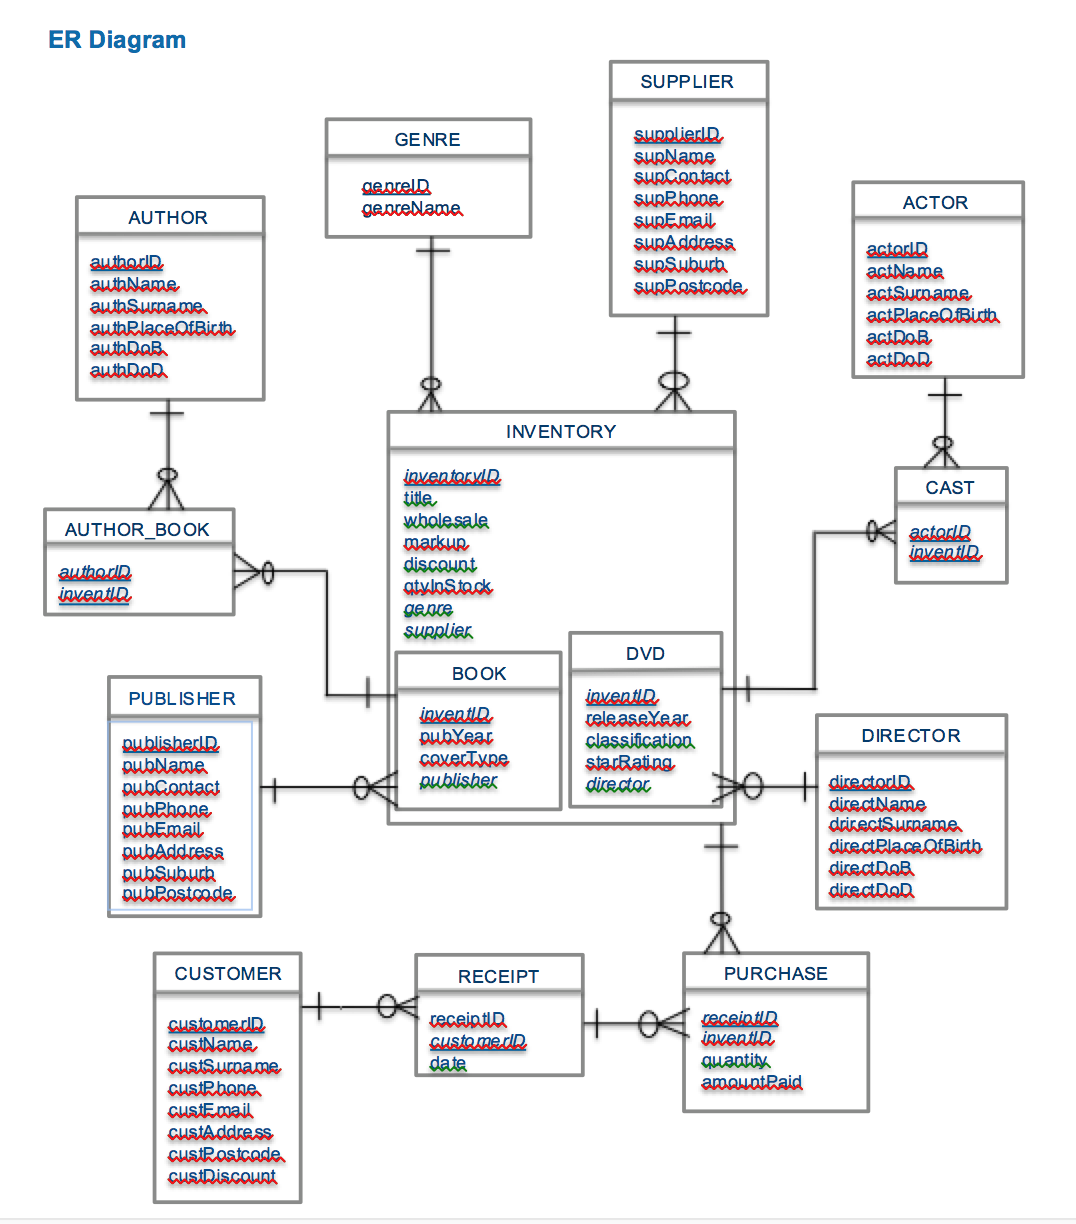 Database How Many Tables Will The Relational Schema Have For This ER 